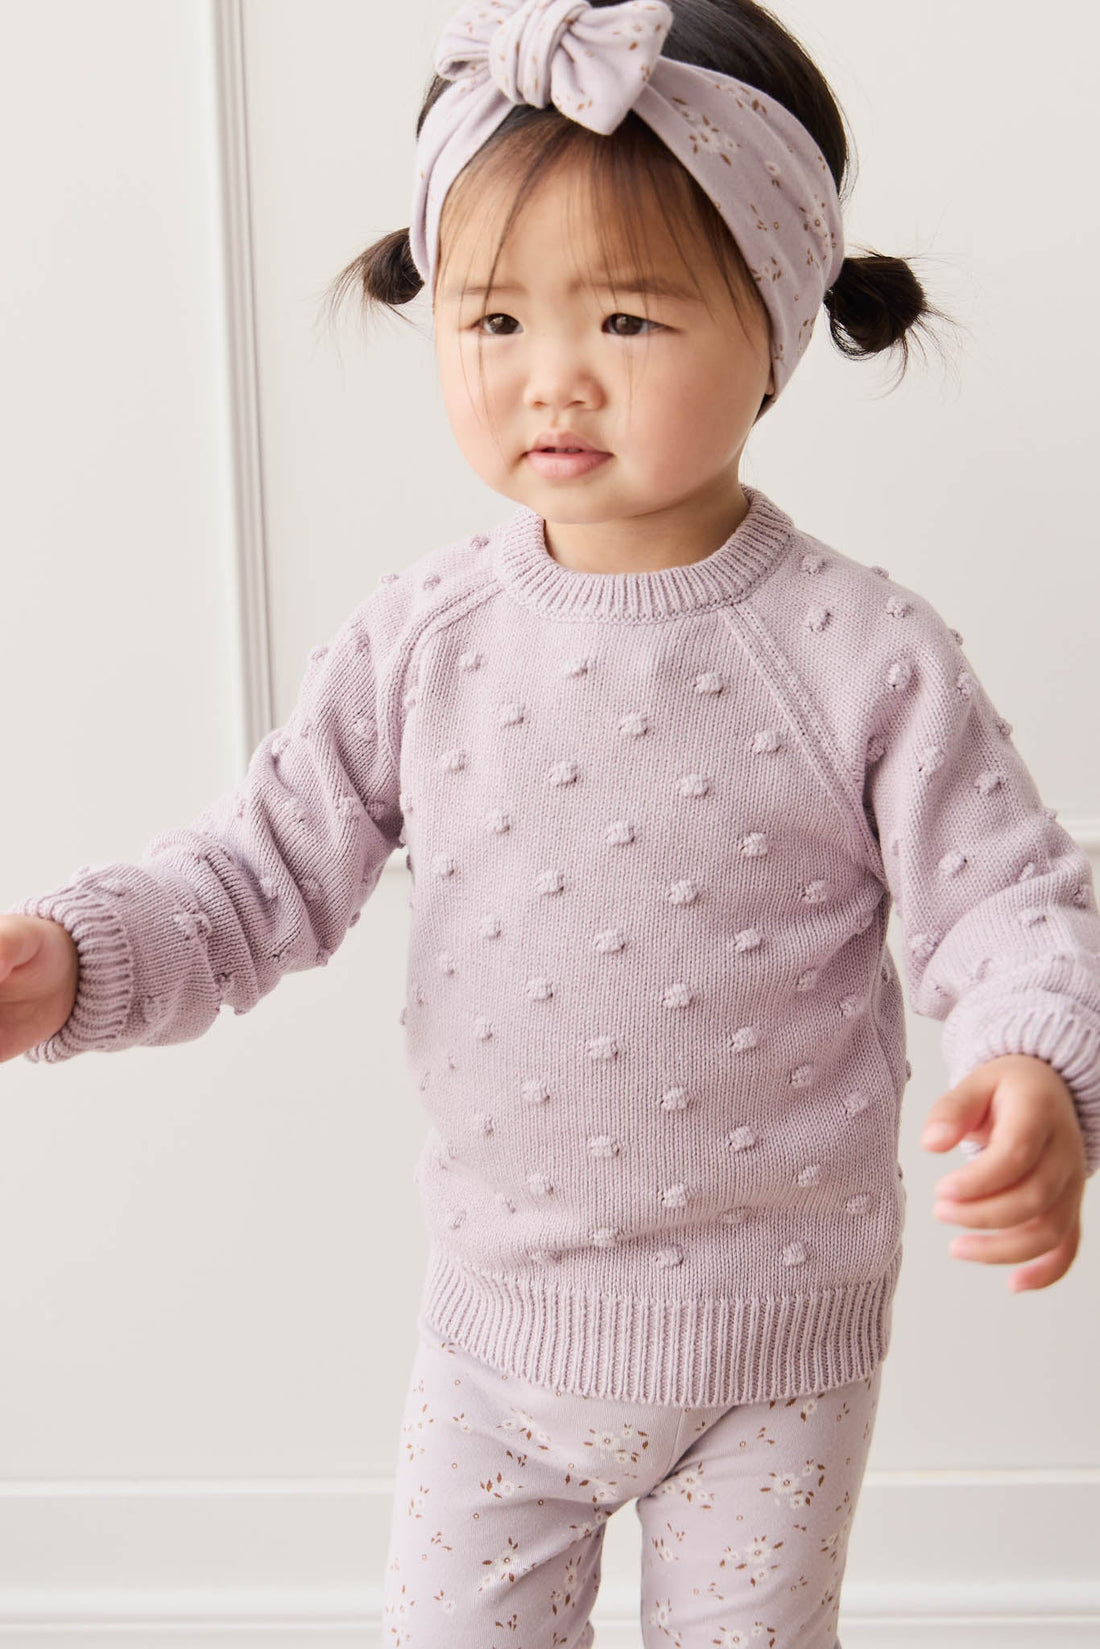 Dotty Knit Jumper - Muted Violet Childrens Jumper from Jamie Kay NZ